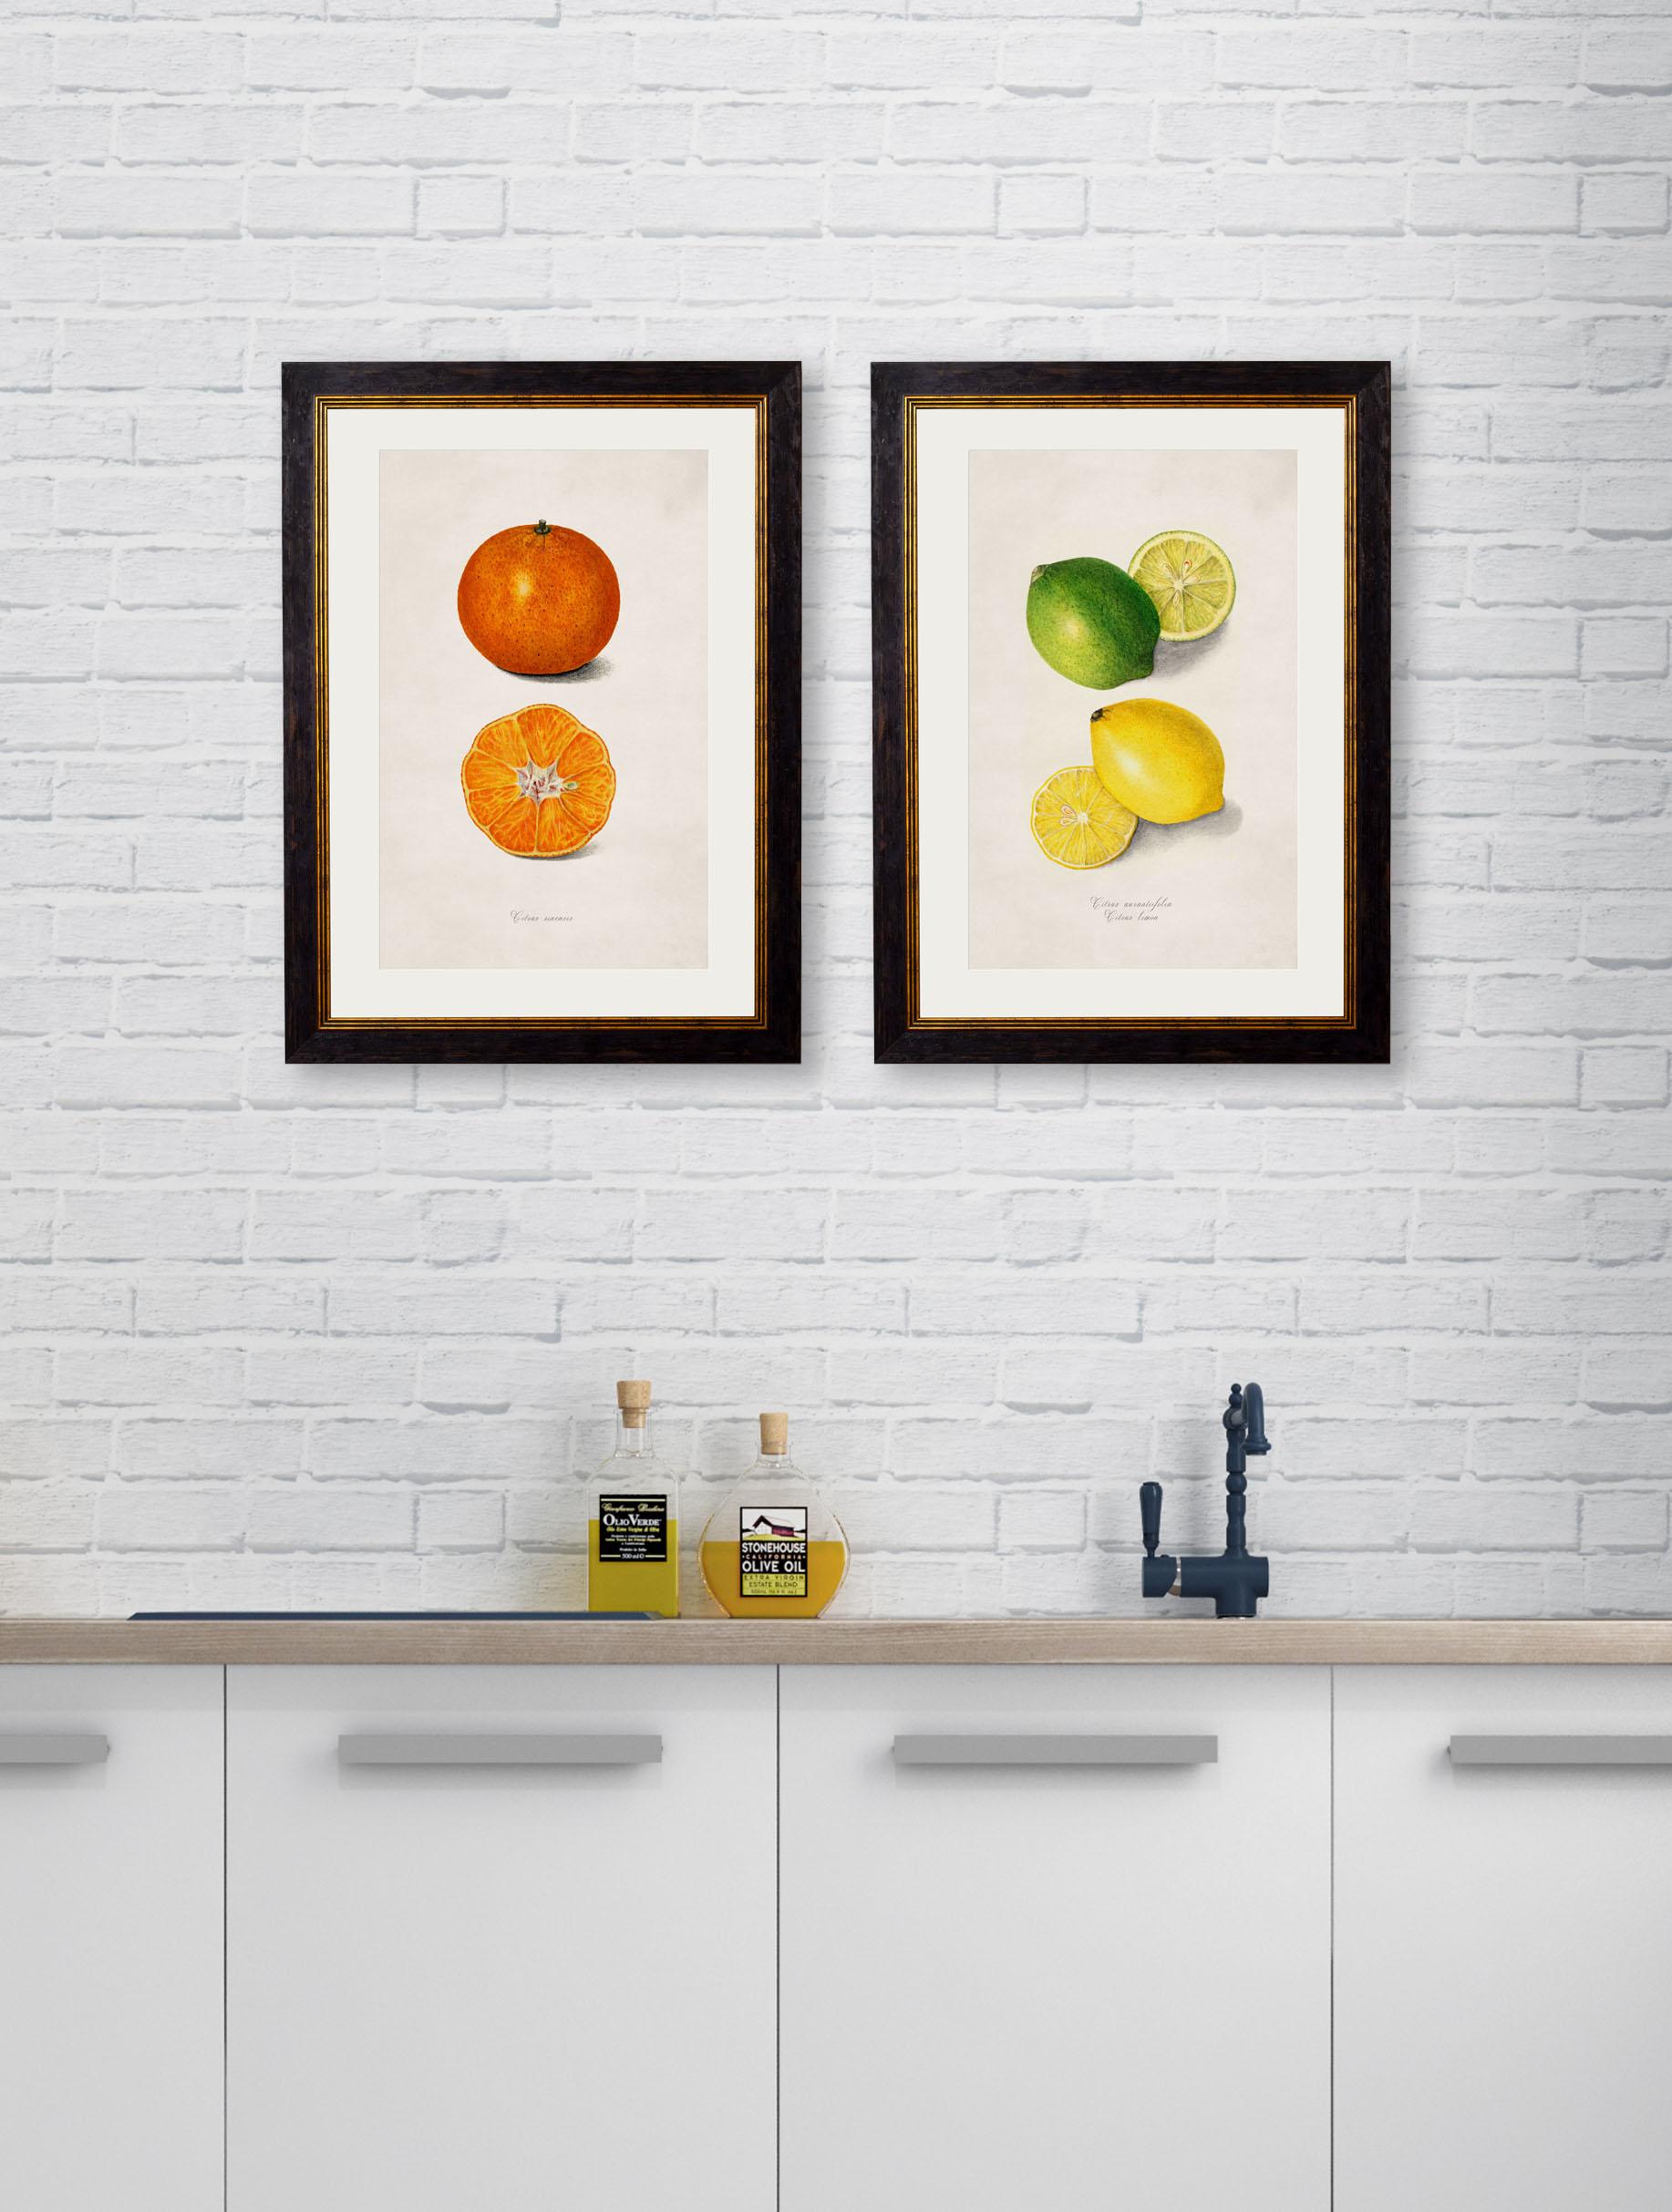 These are a set of TWO digitally remastered prints of Citrus Fruit studies, hand coloured and framed, originally from American water colours from Circa 1886.

This exquisite PAIR of prints references late 19th century watercolour paintings of